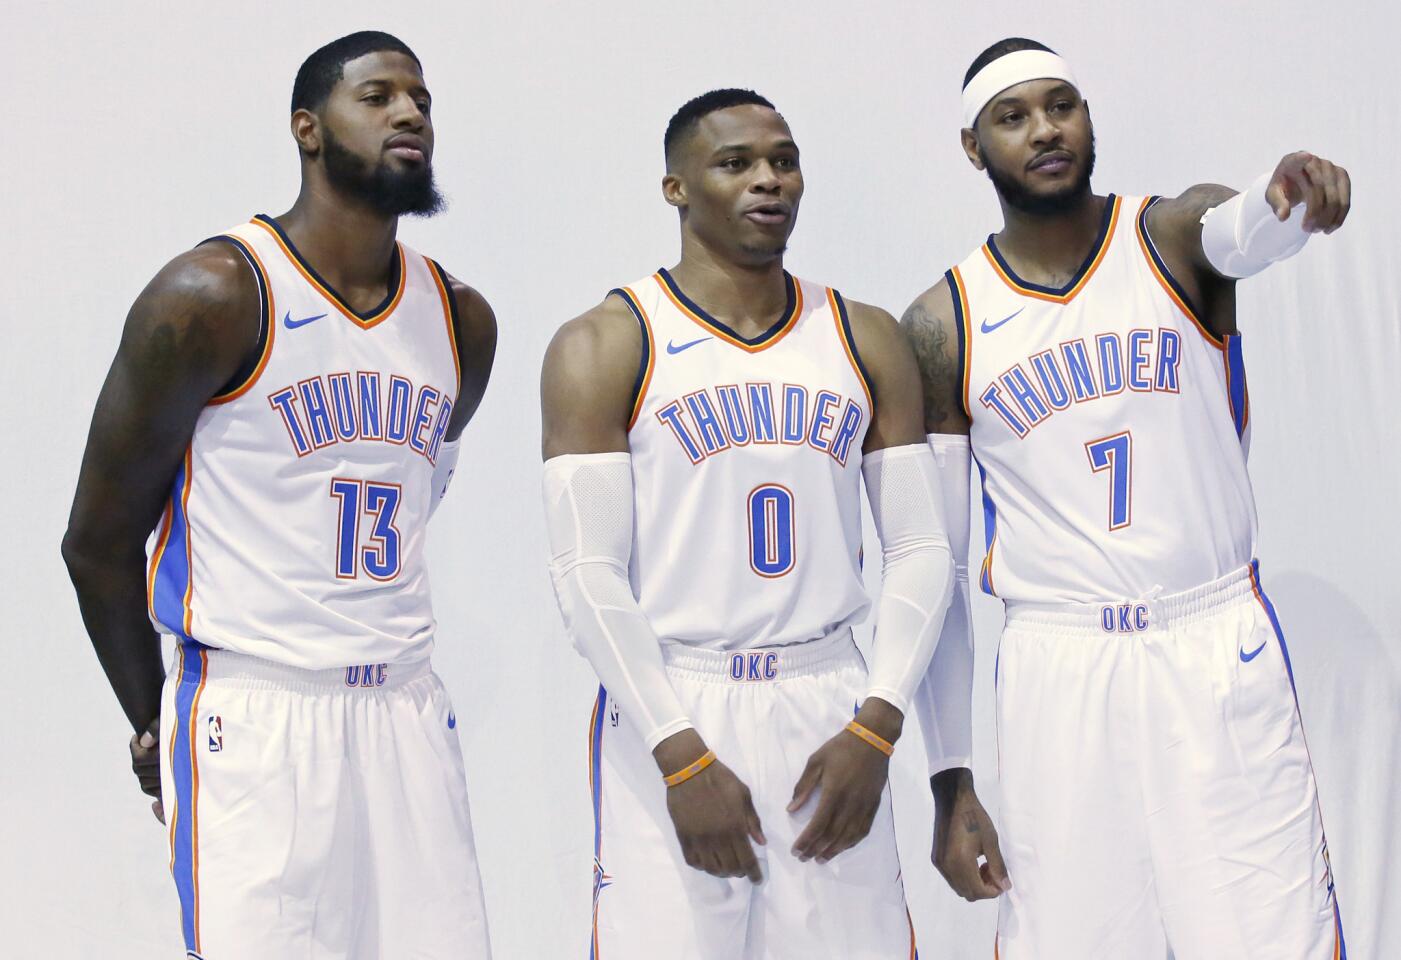 Paul George, Russell Westbrook, Carmelo Anthony